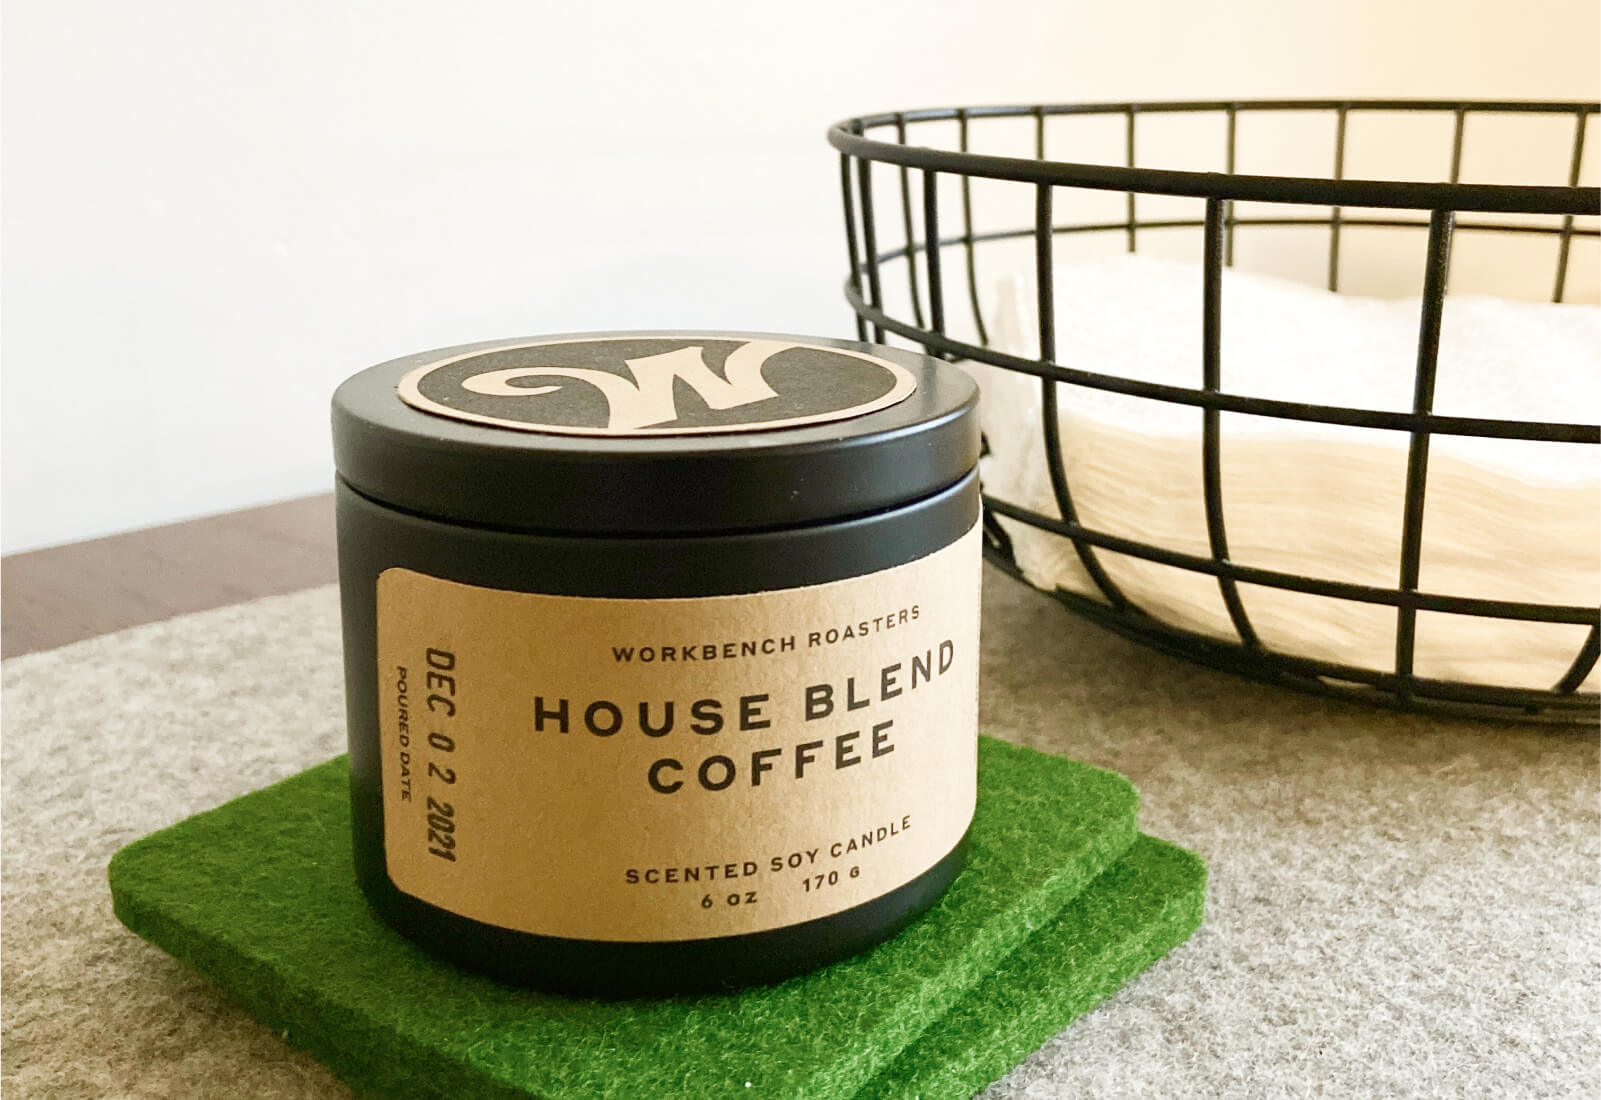 Branding in Use on Coffee Scented Candles | Workbench Roasters